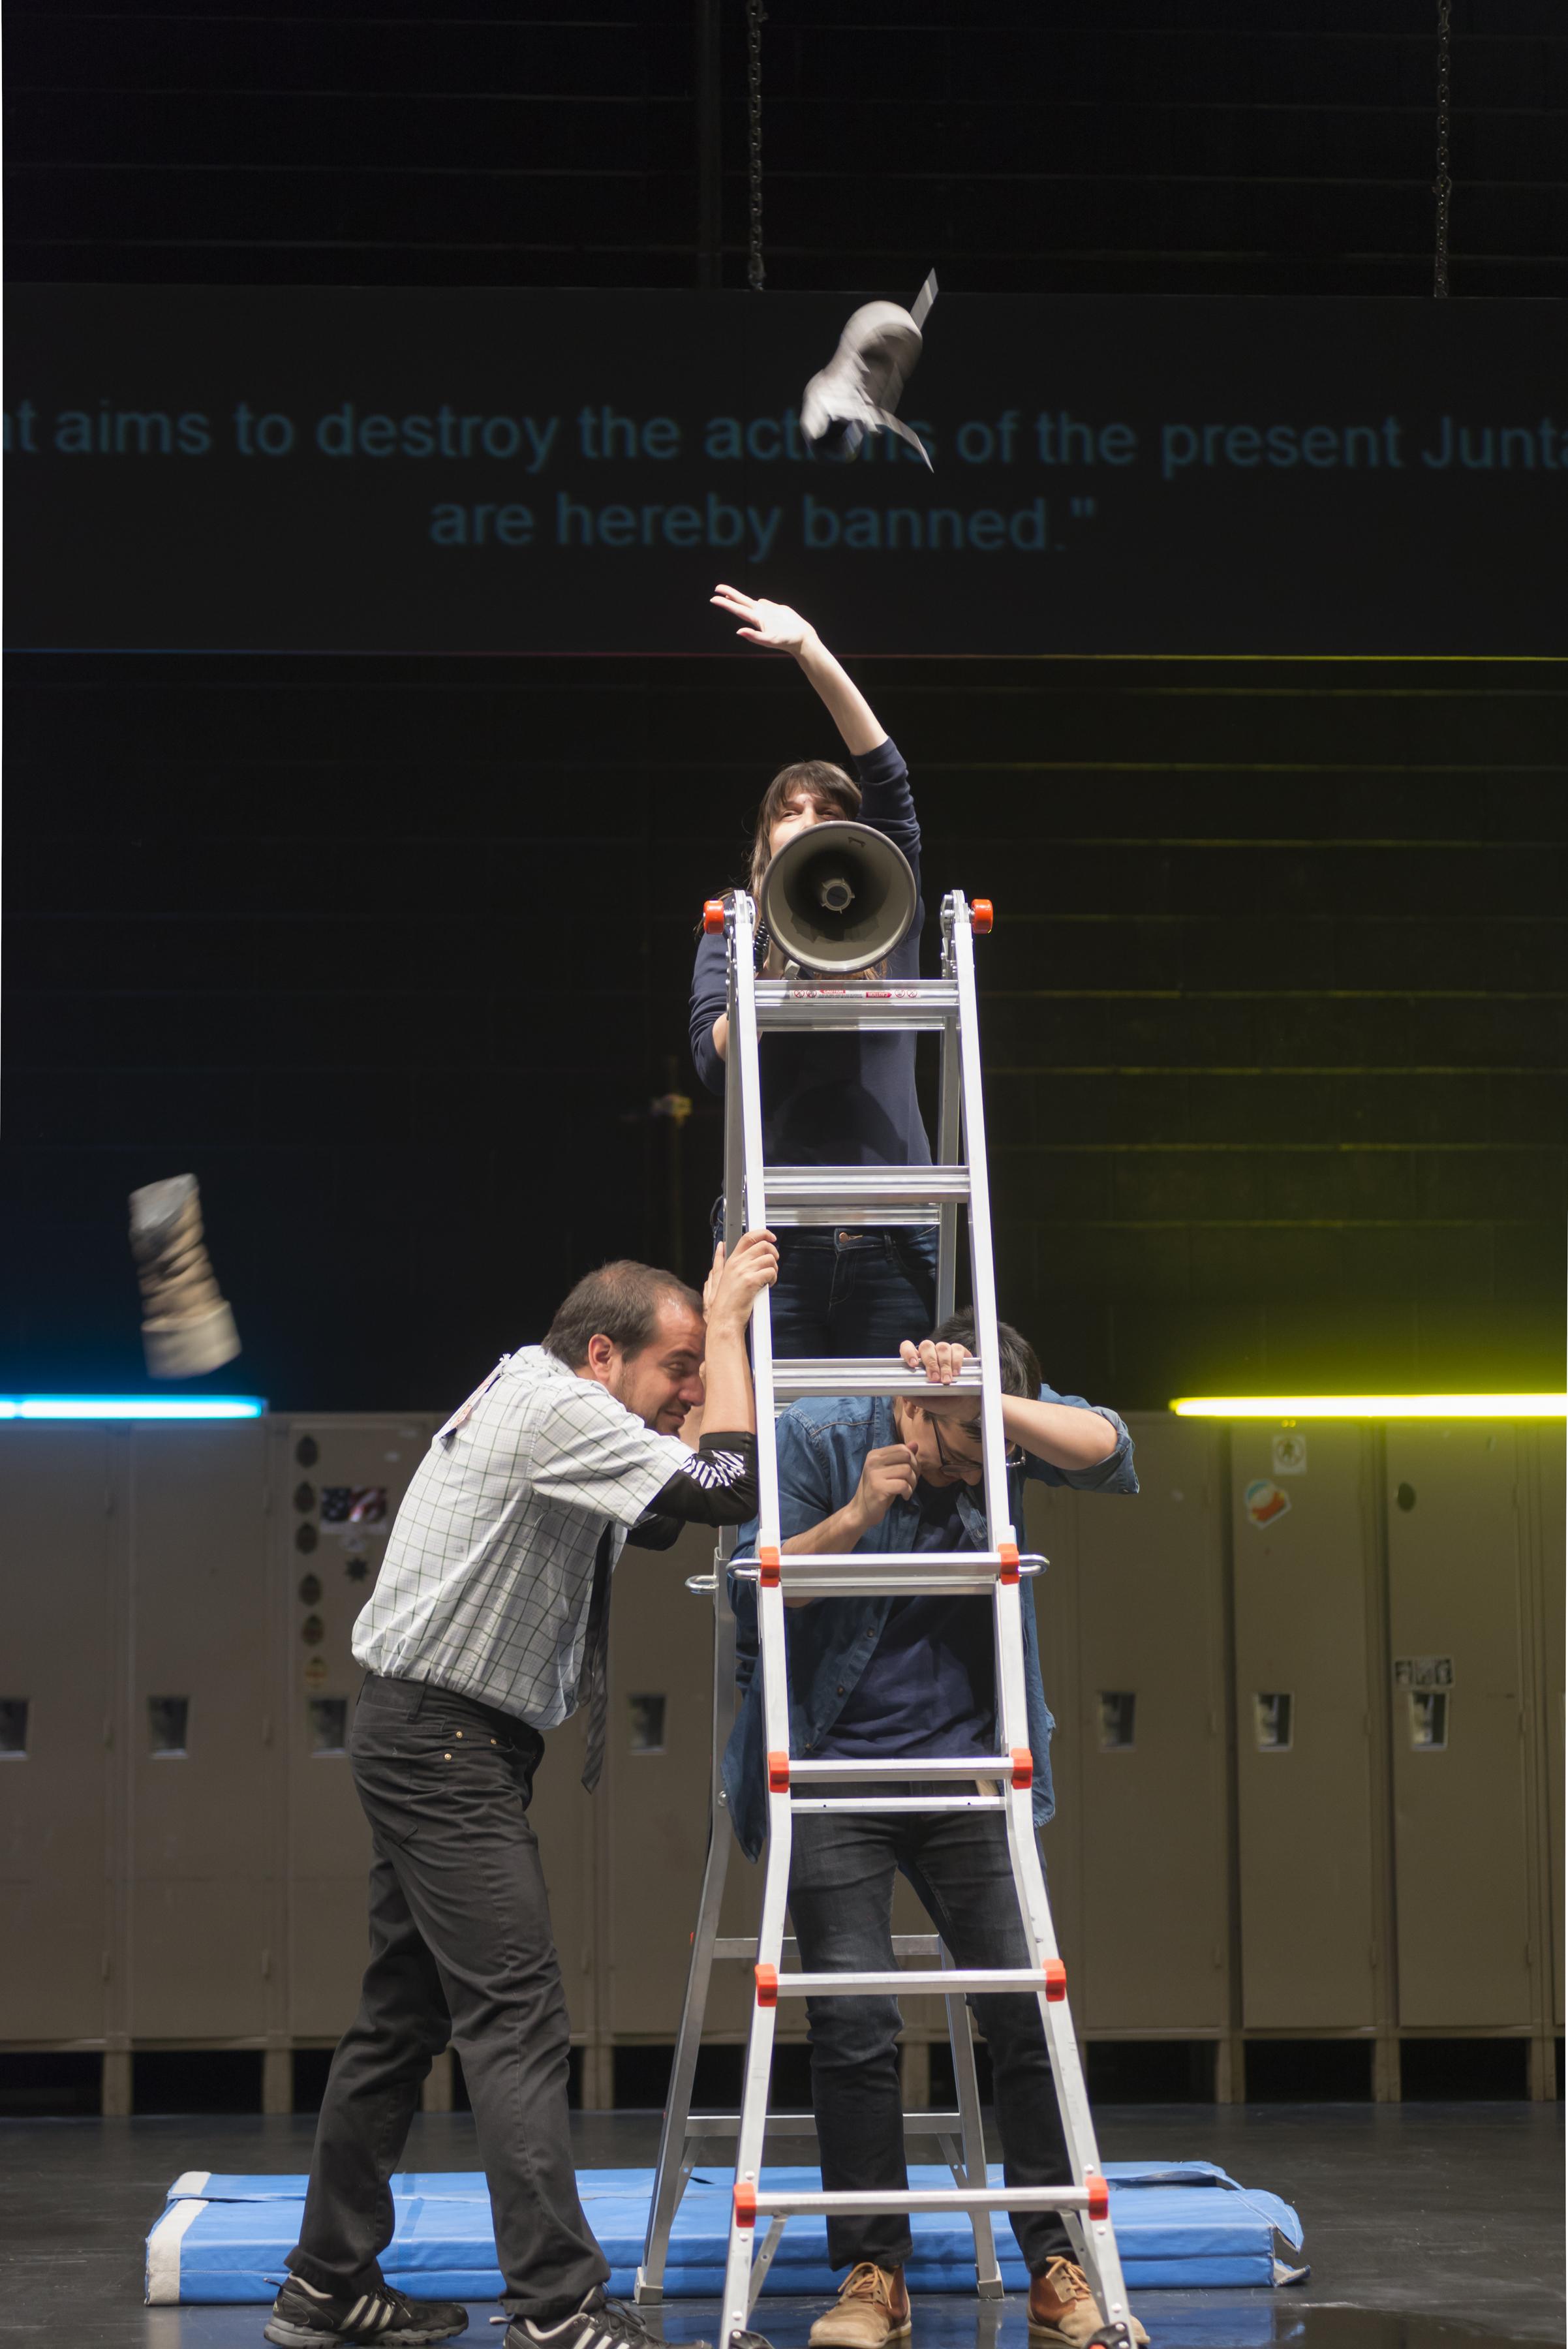 On a stage set with lockers and gym mats, a woman on a freestanding ladder talks through a loud speaker. She has thrown something in the air, and two men below her cringe, taking shelter under the ladder.